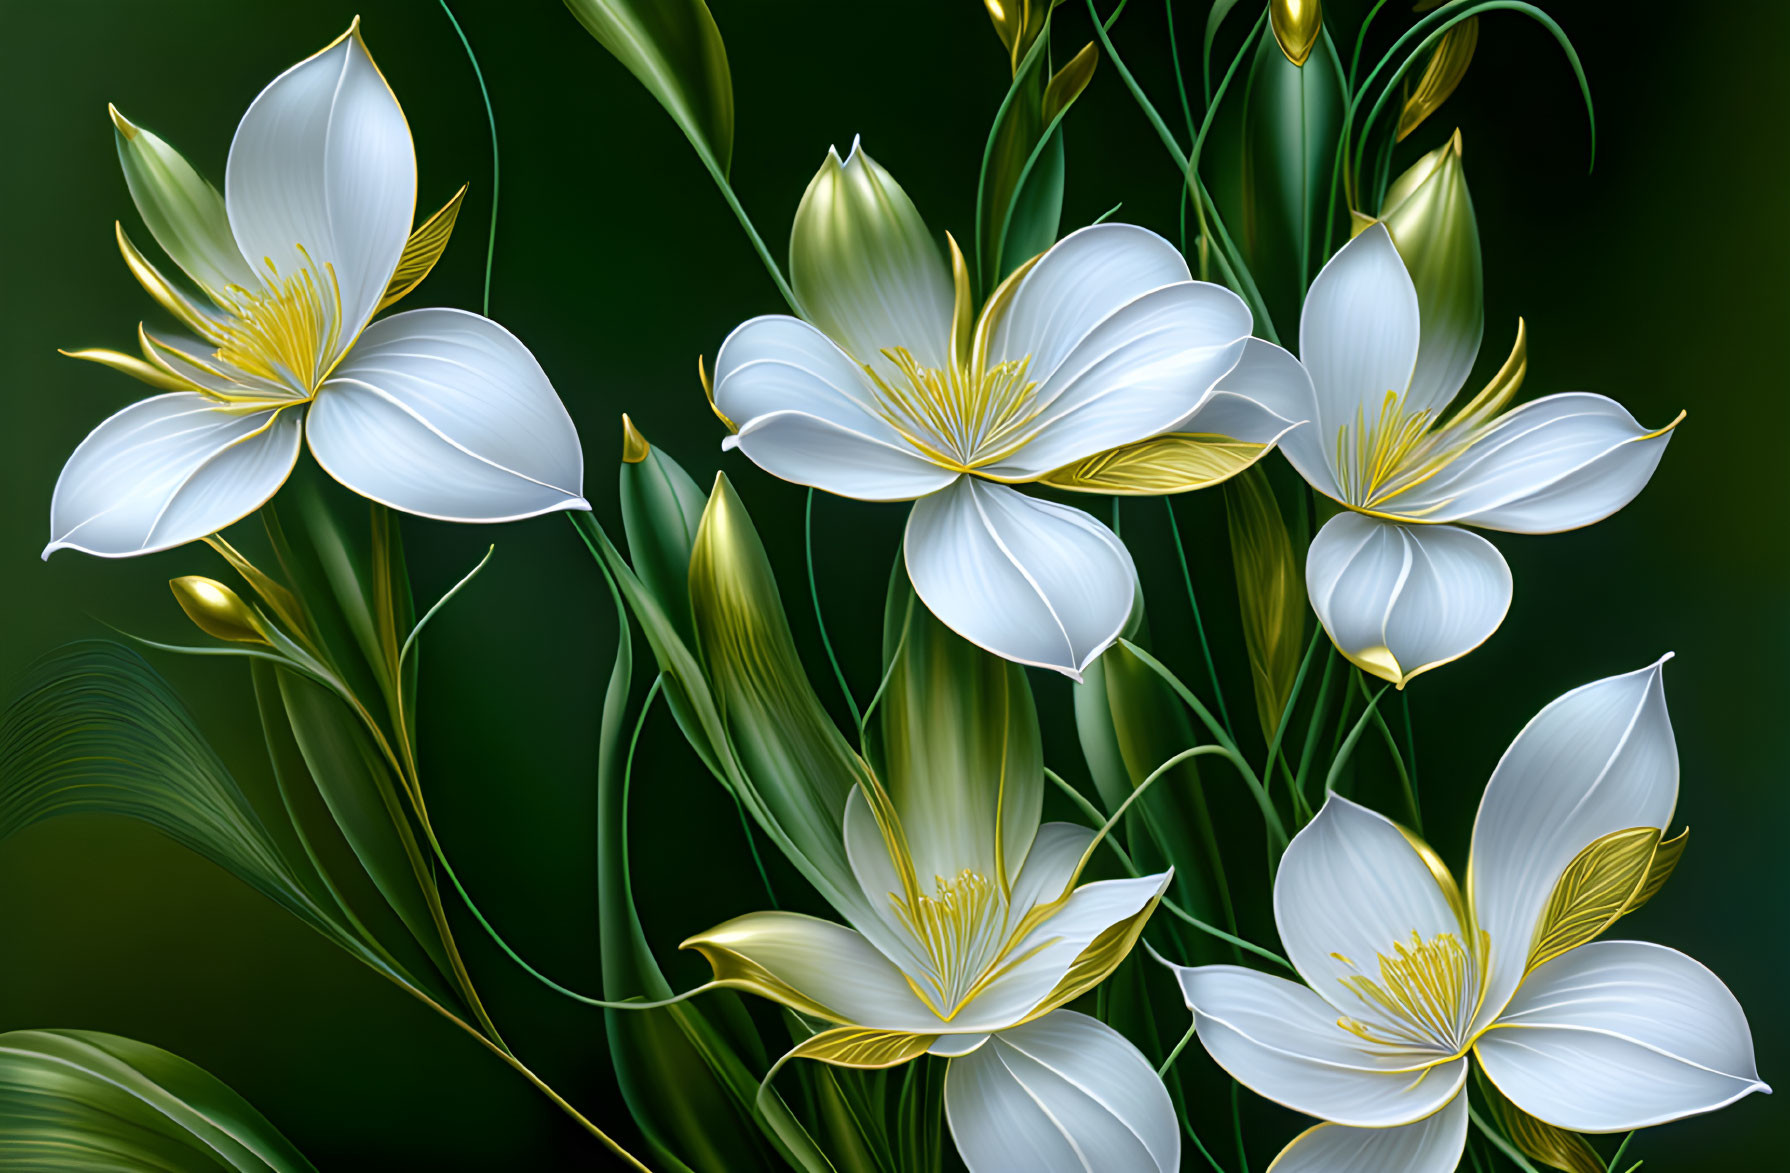 White Flowers with Yellow Stamens and Green Leaves on Dark Green Background